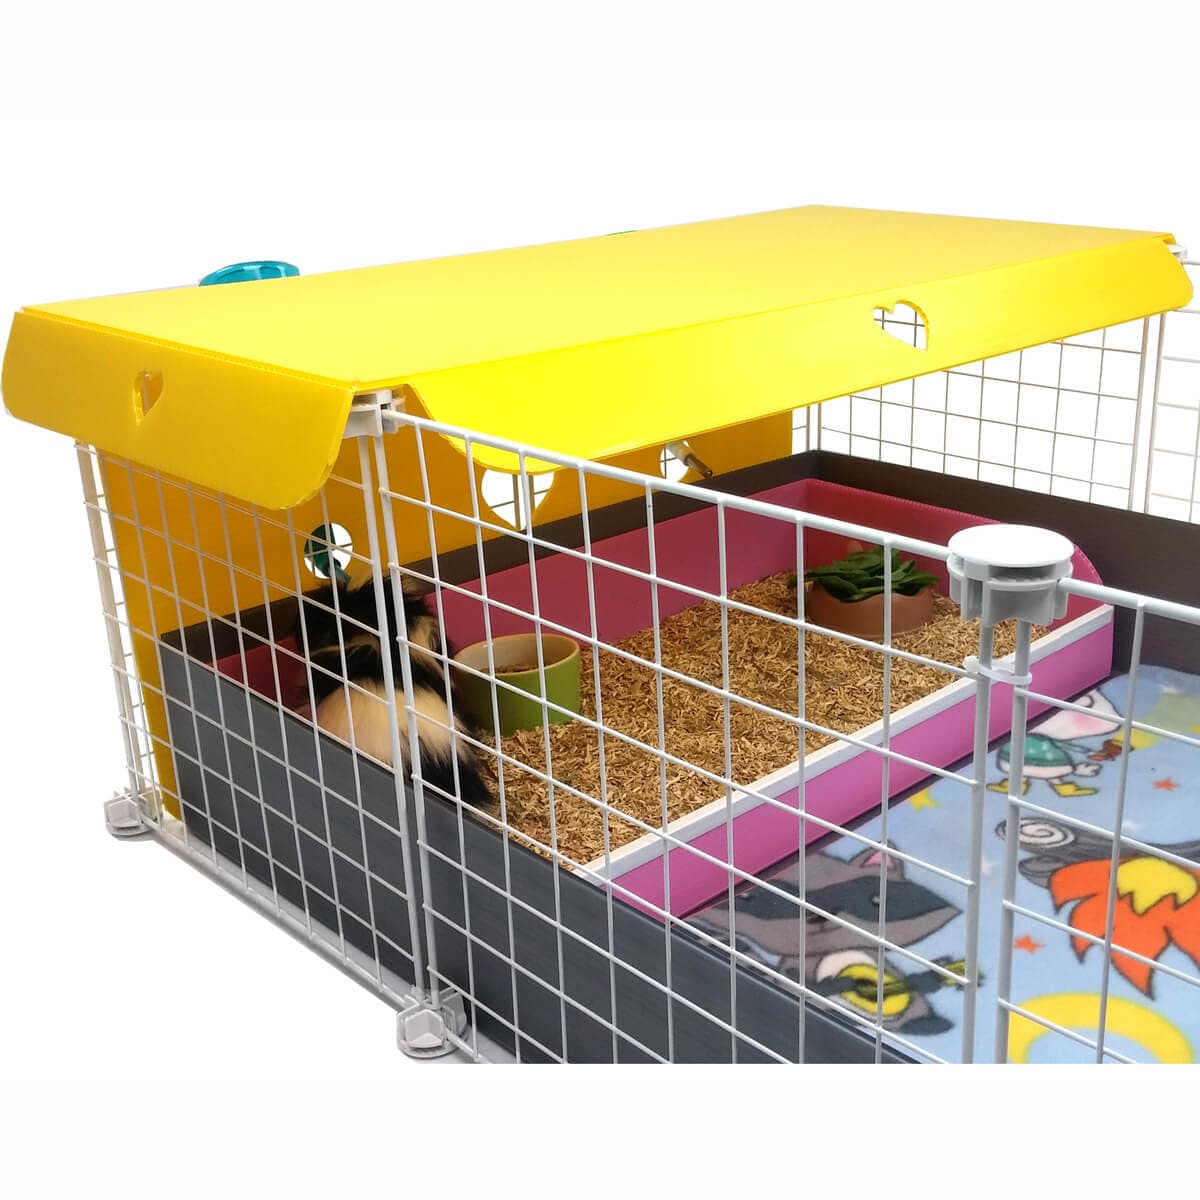 Guinea pig in a colorful Kitchen suite in a Silver C&C guinea pig cage